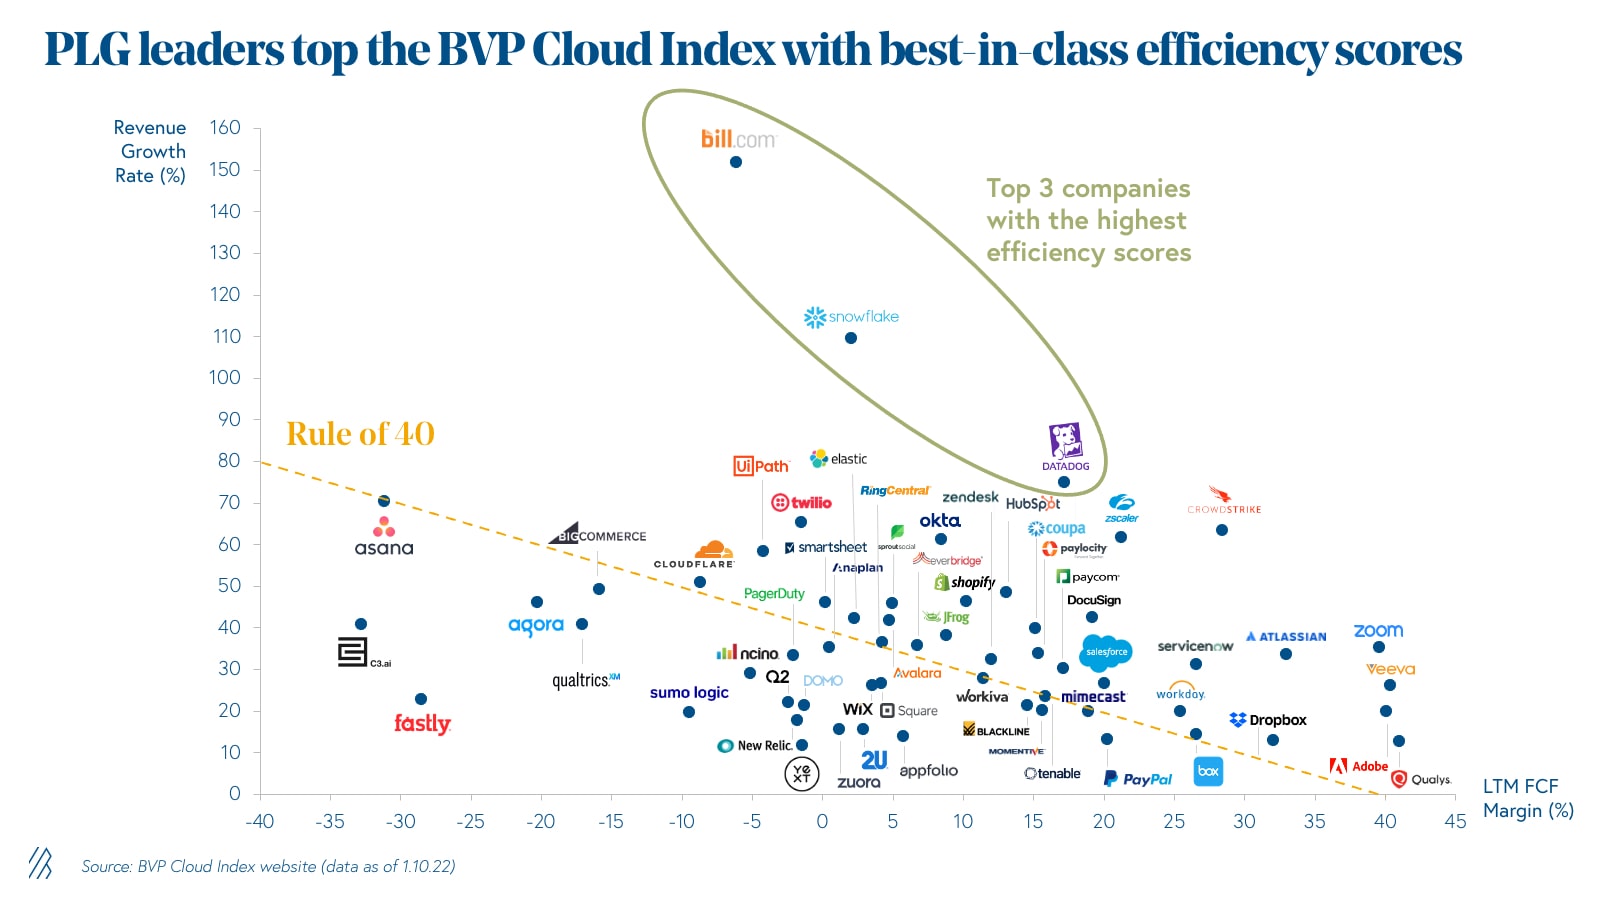 PLG leaders top the BVP Cloud Index with best-in-class efficiency scores